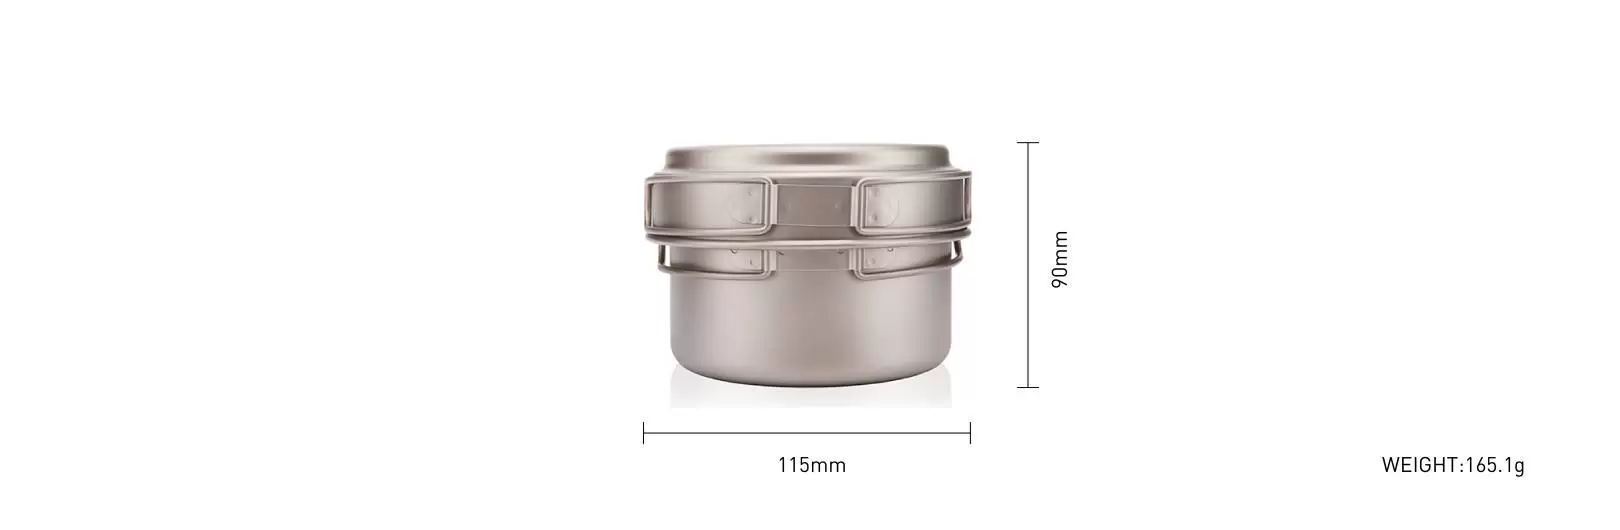 details of Titanium Alloy Pan Backpacking Pot with Foldable Handles